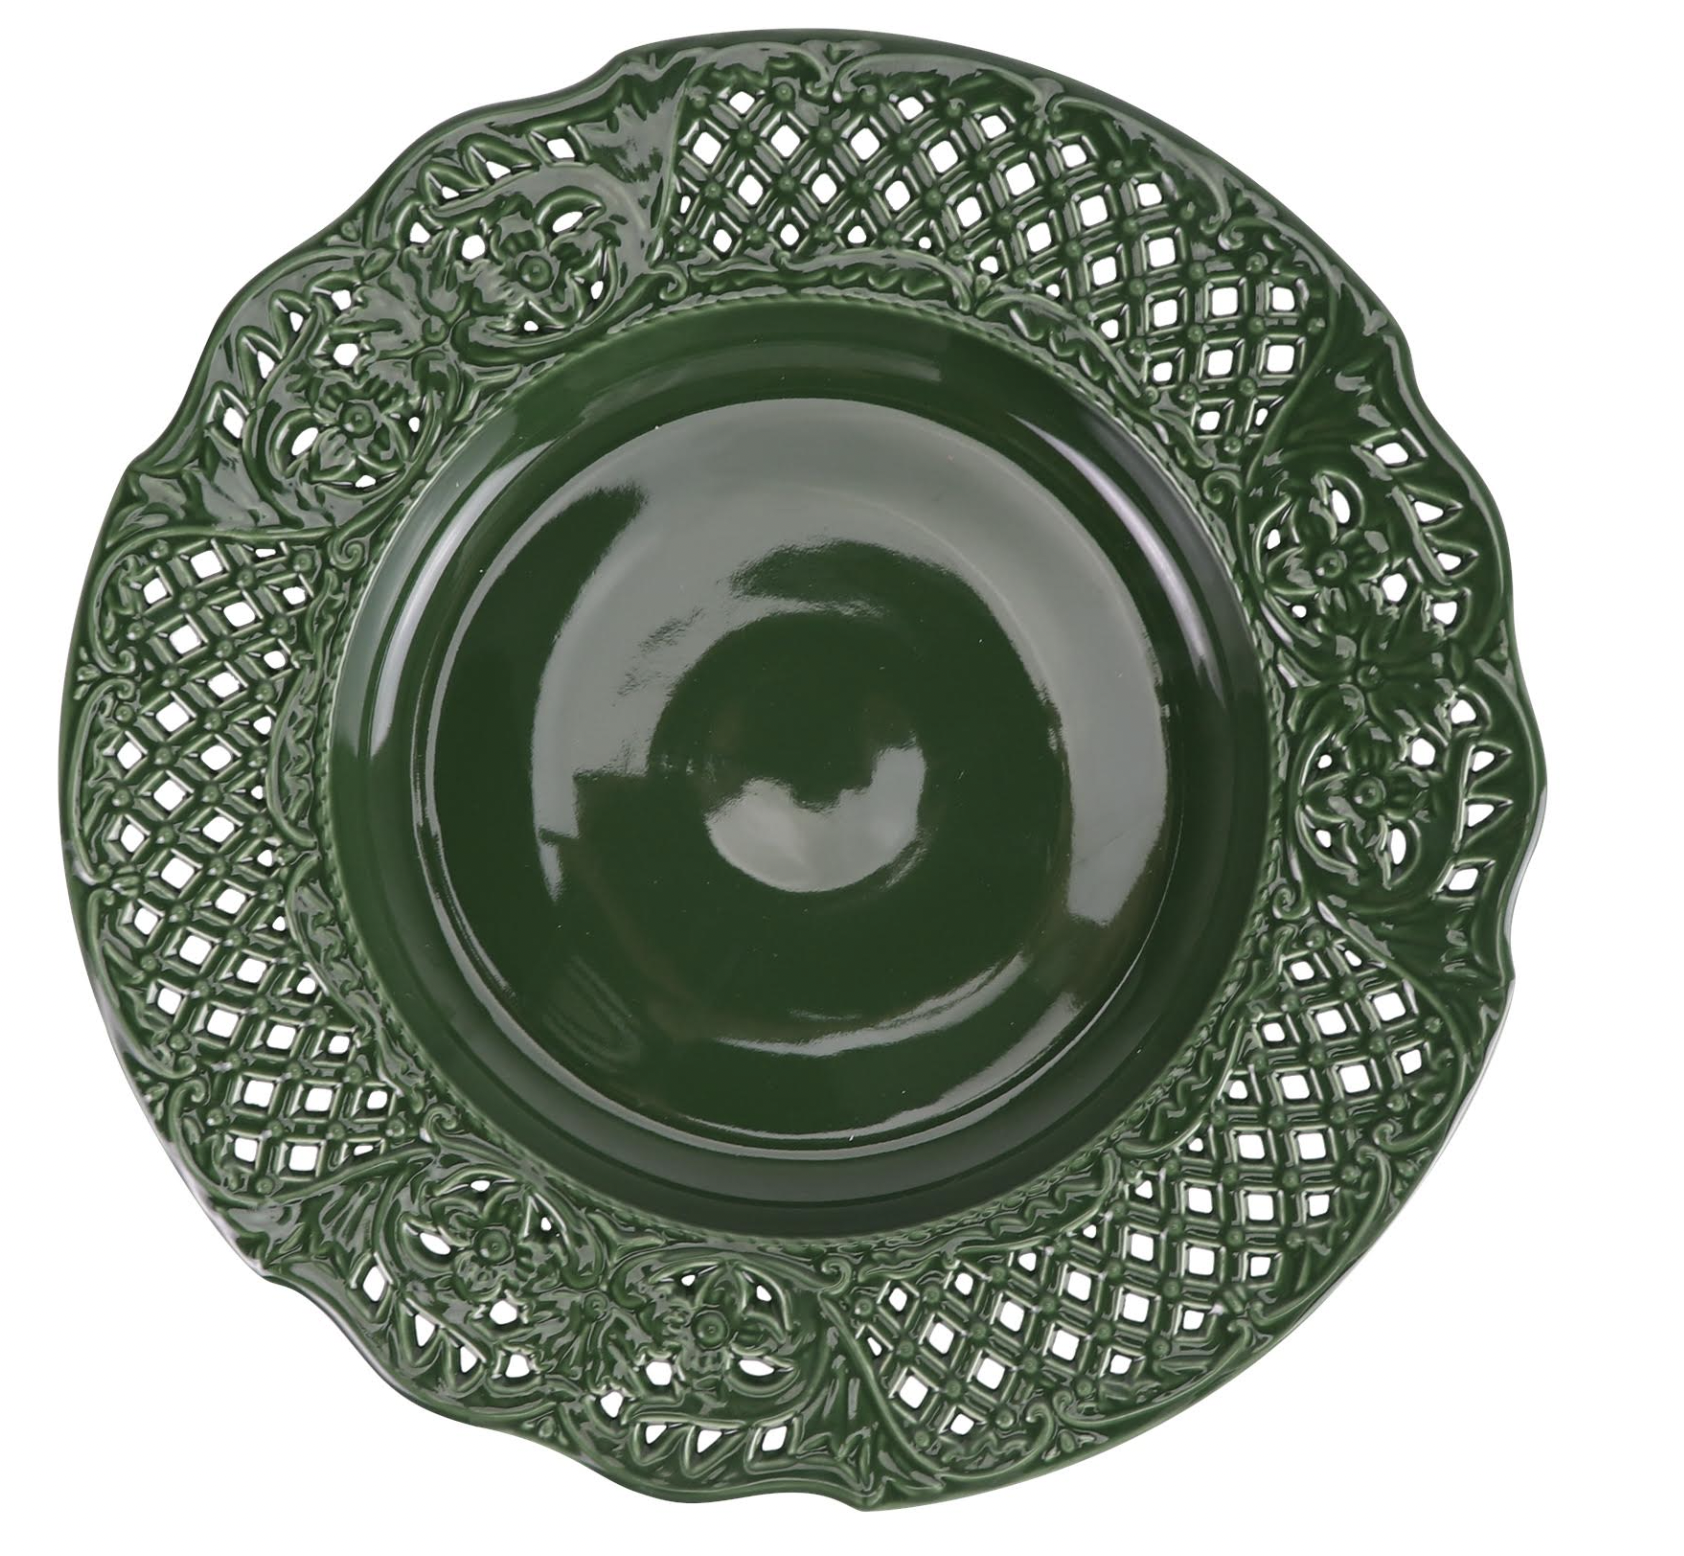 Incredible porcelain raised floral pierced charger (mossy green)